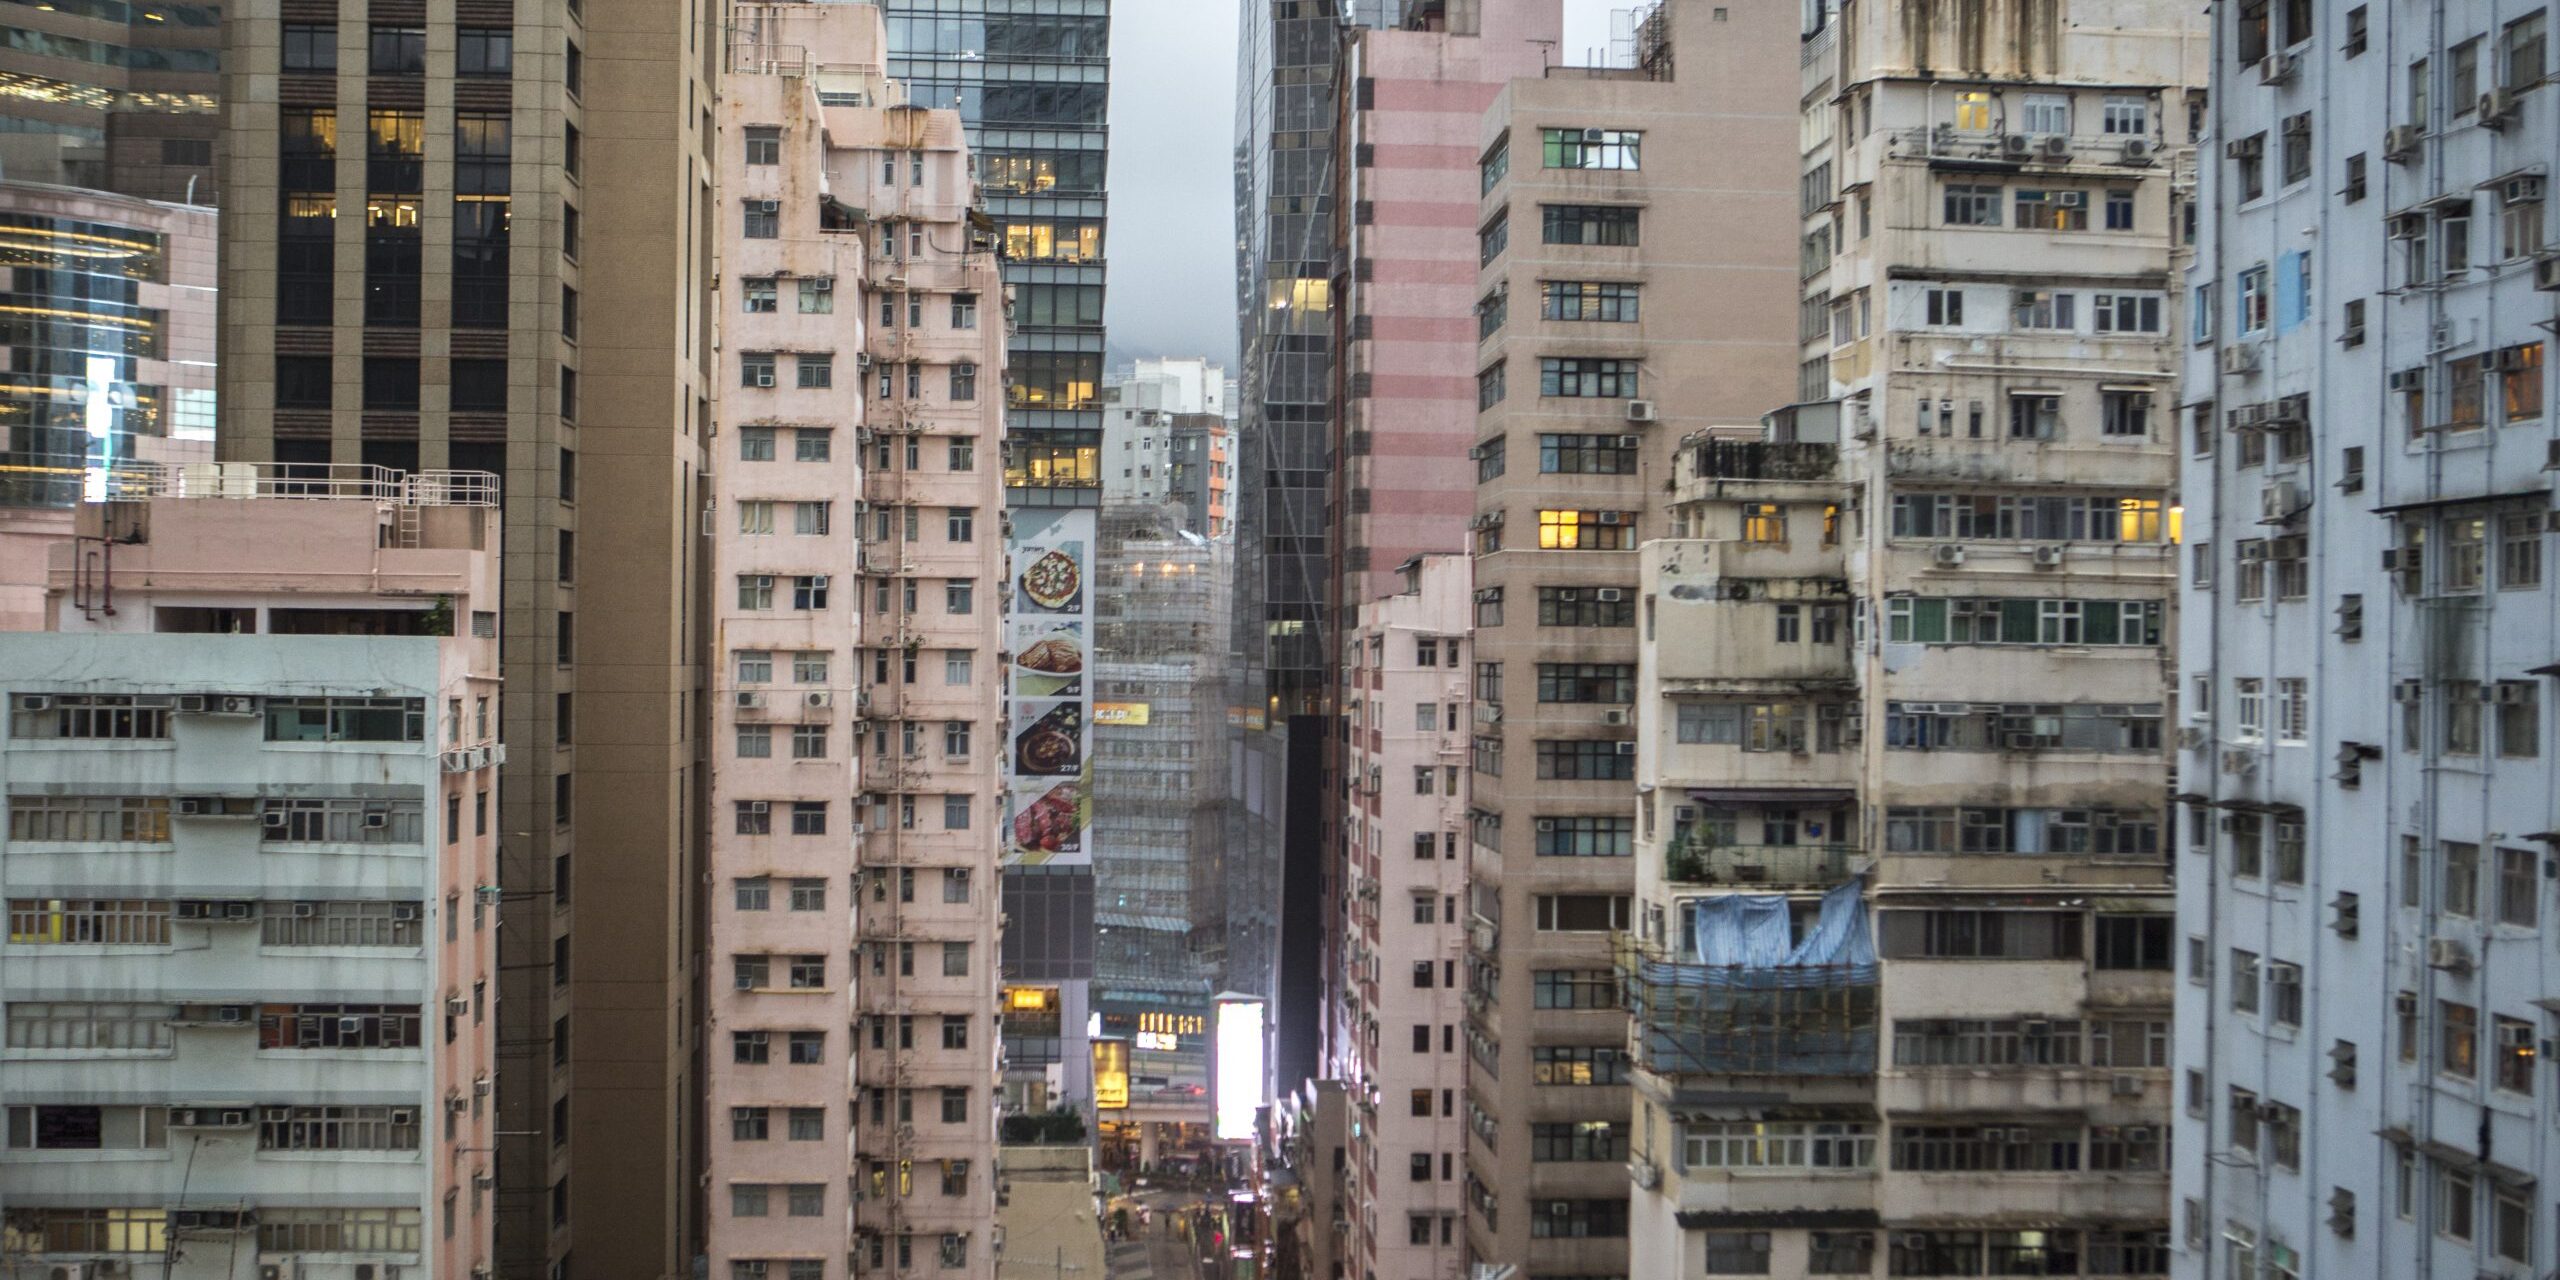 According to studies conducted by the Hong Kong Observatory, urbanization contributes about 50% of the warming in cities like Hong Kong. Concrete buildings store heat in the day and release it in the night, unbalancing the normal day and night cooling cycle. in addition, tall building block air circulation and reduce wind speed.